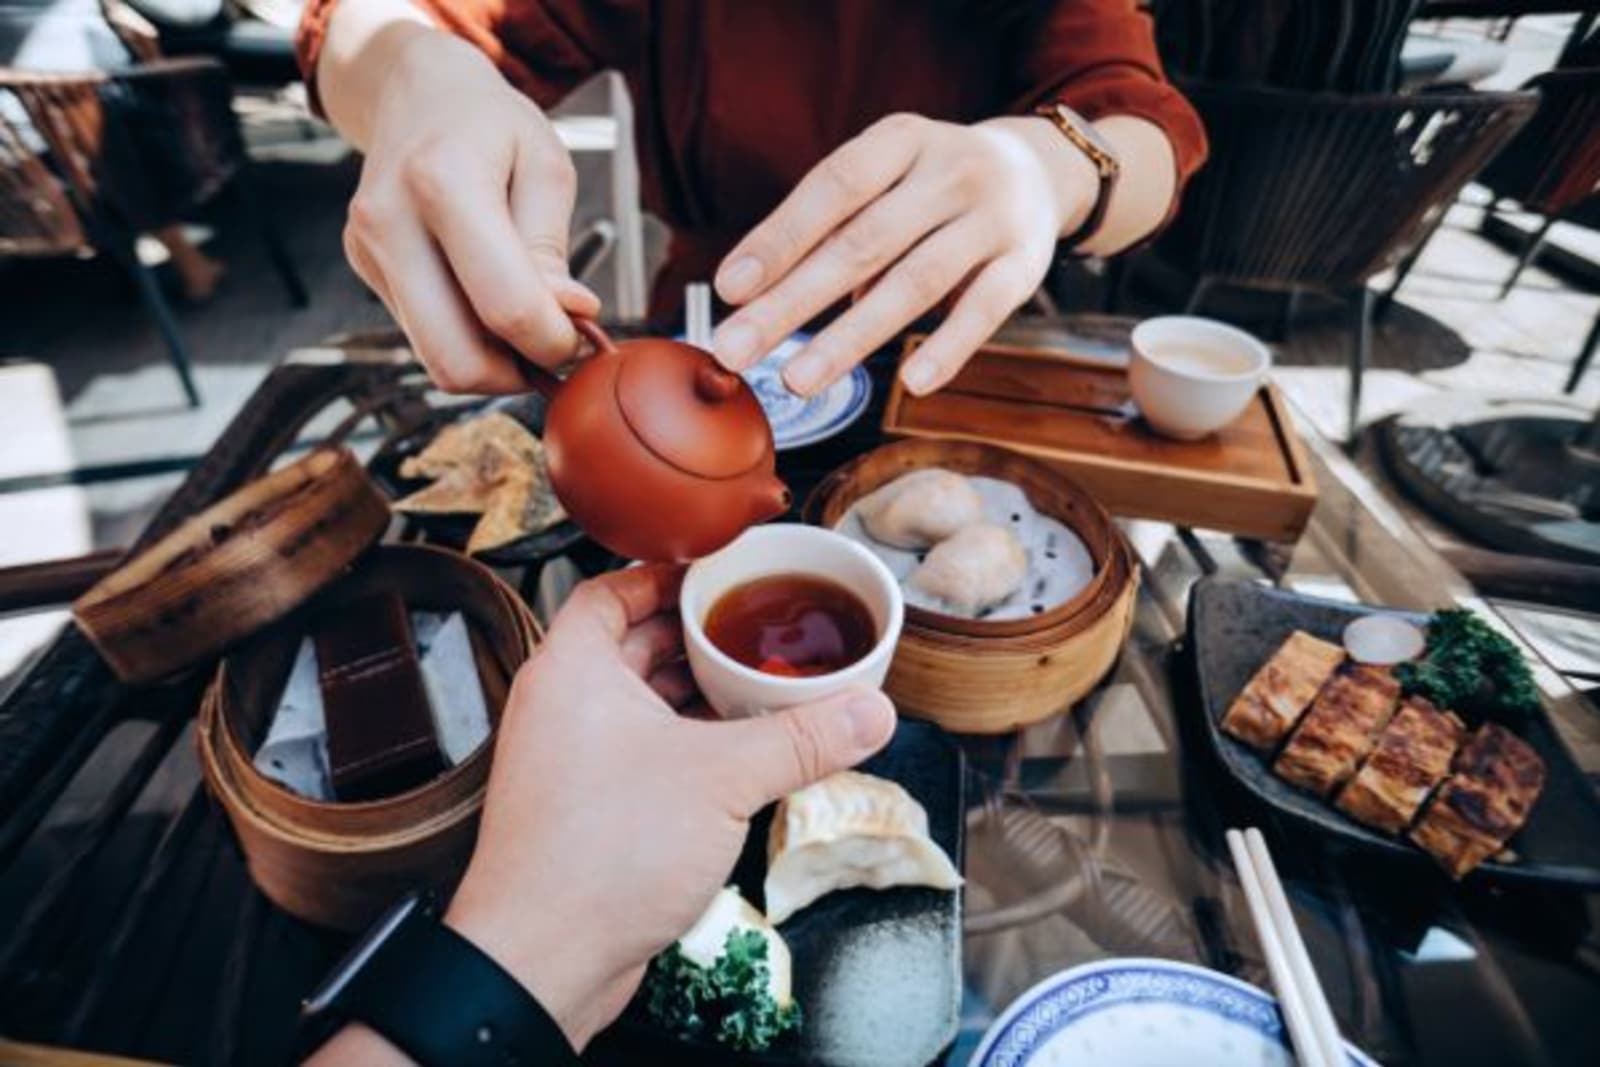 Woman pouring tea in a cup for a man and a table that has dumplings and traditional Asian foods